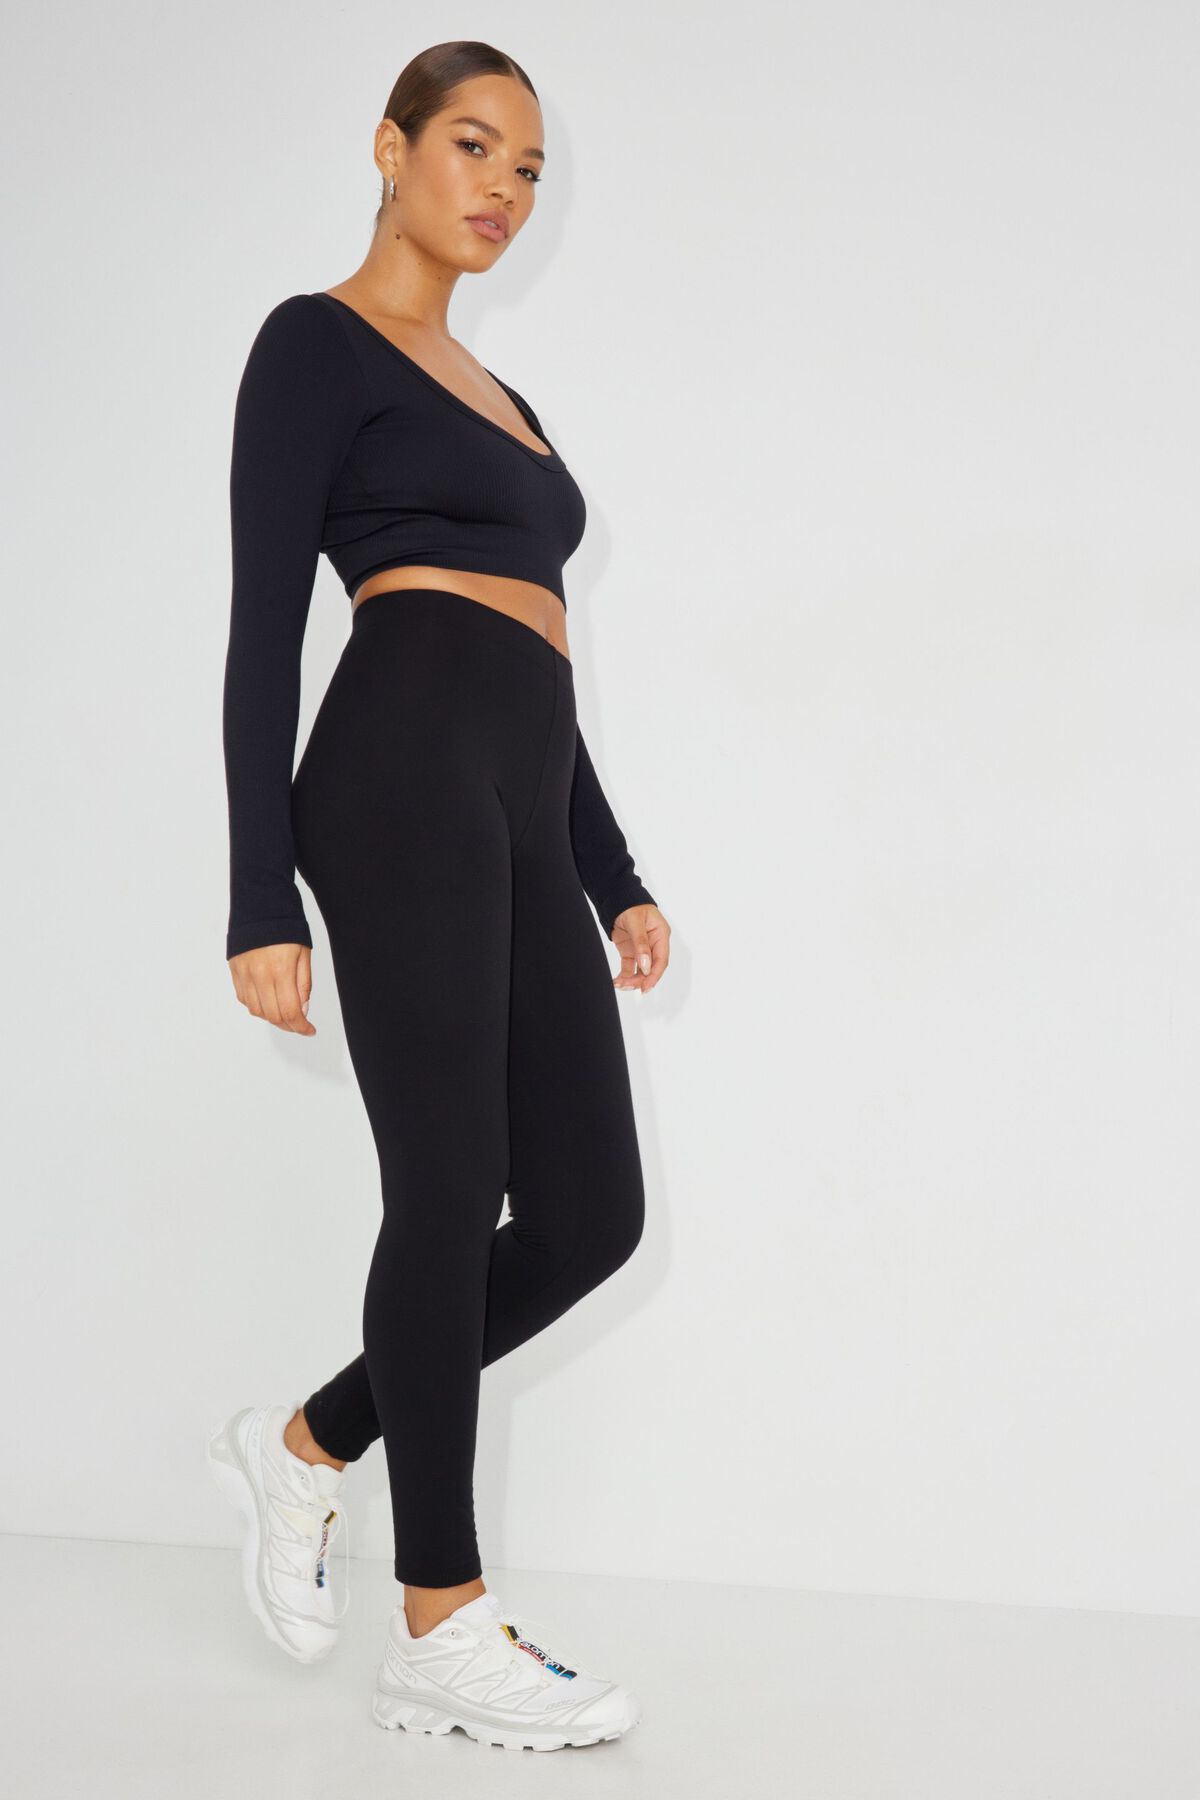 Luxury Leggings, Shop The Largest Collection